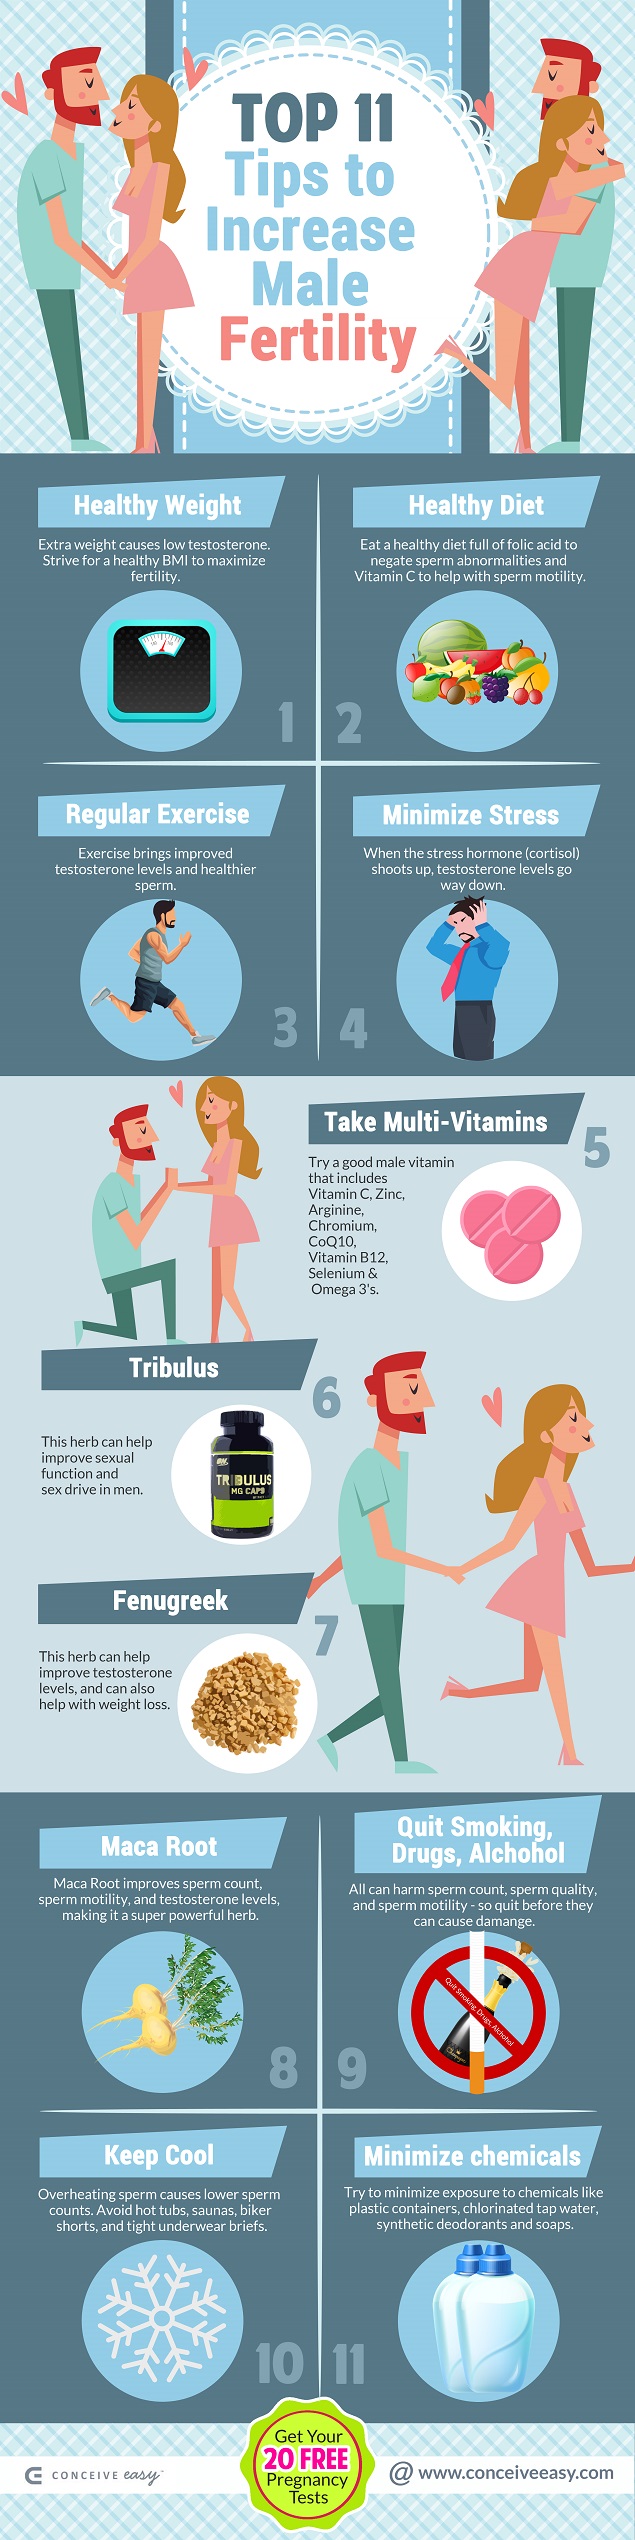 Top 11 Tips to Increase Male Fertility Infographic